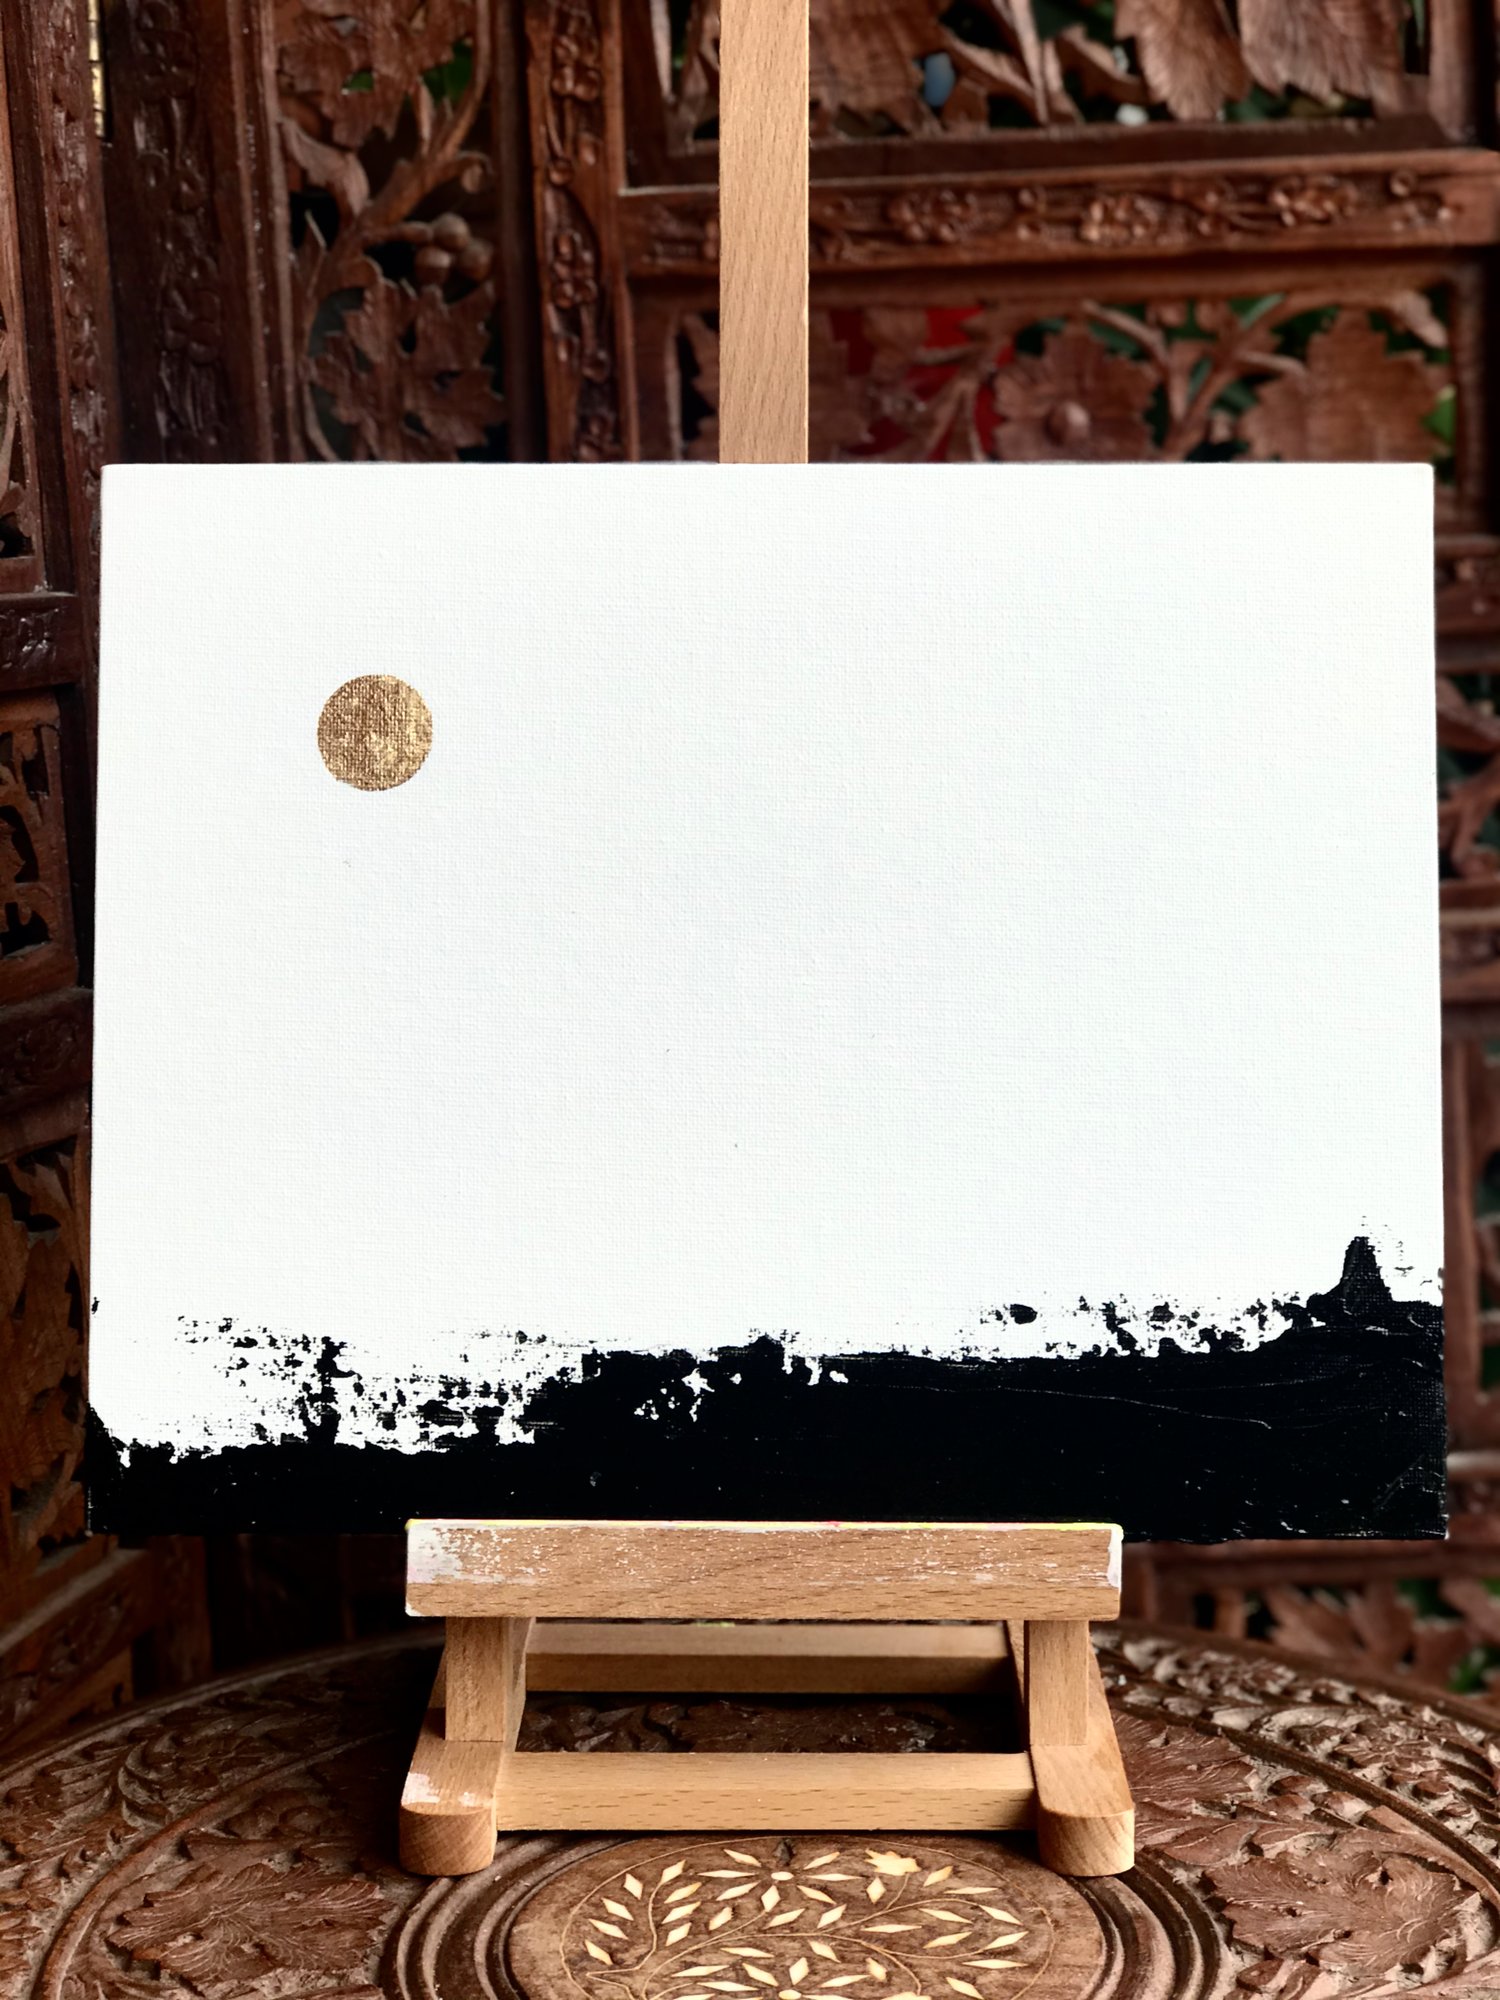 I promised to show what I think about minimalism - acrylic on canvas board 24x30cm with gold